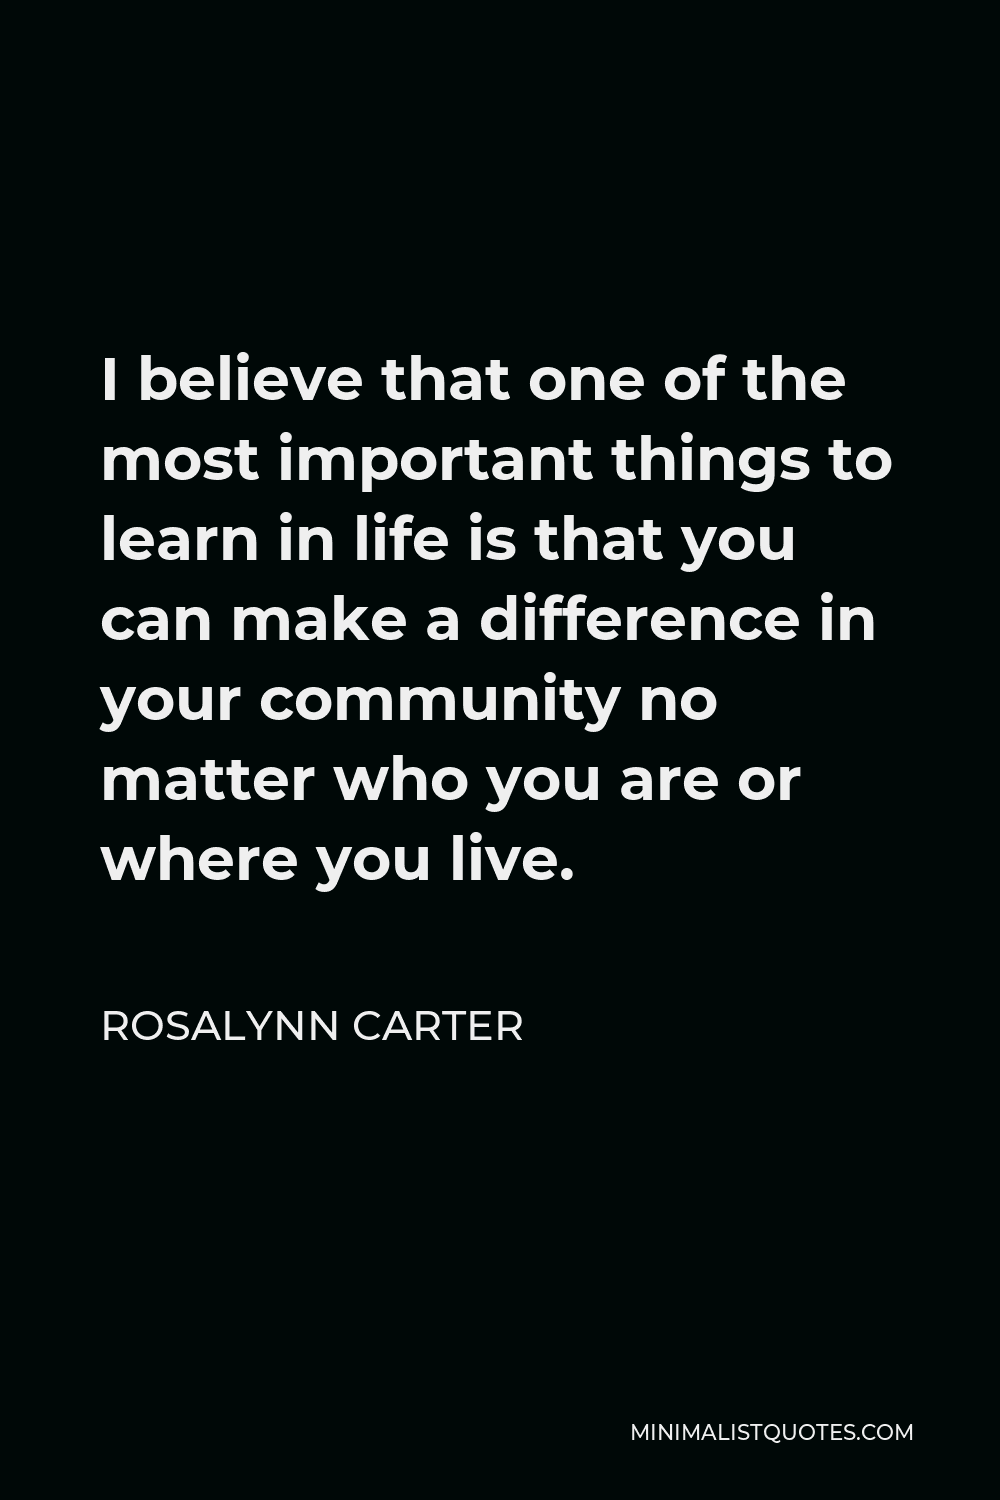 Rosalynn Carter Quote - I believe that one of the most important things to learn in life is that you can make a difference in your community no matter who you are or where you live.